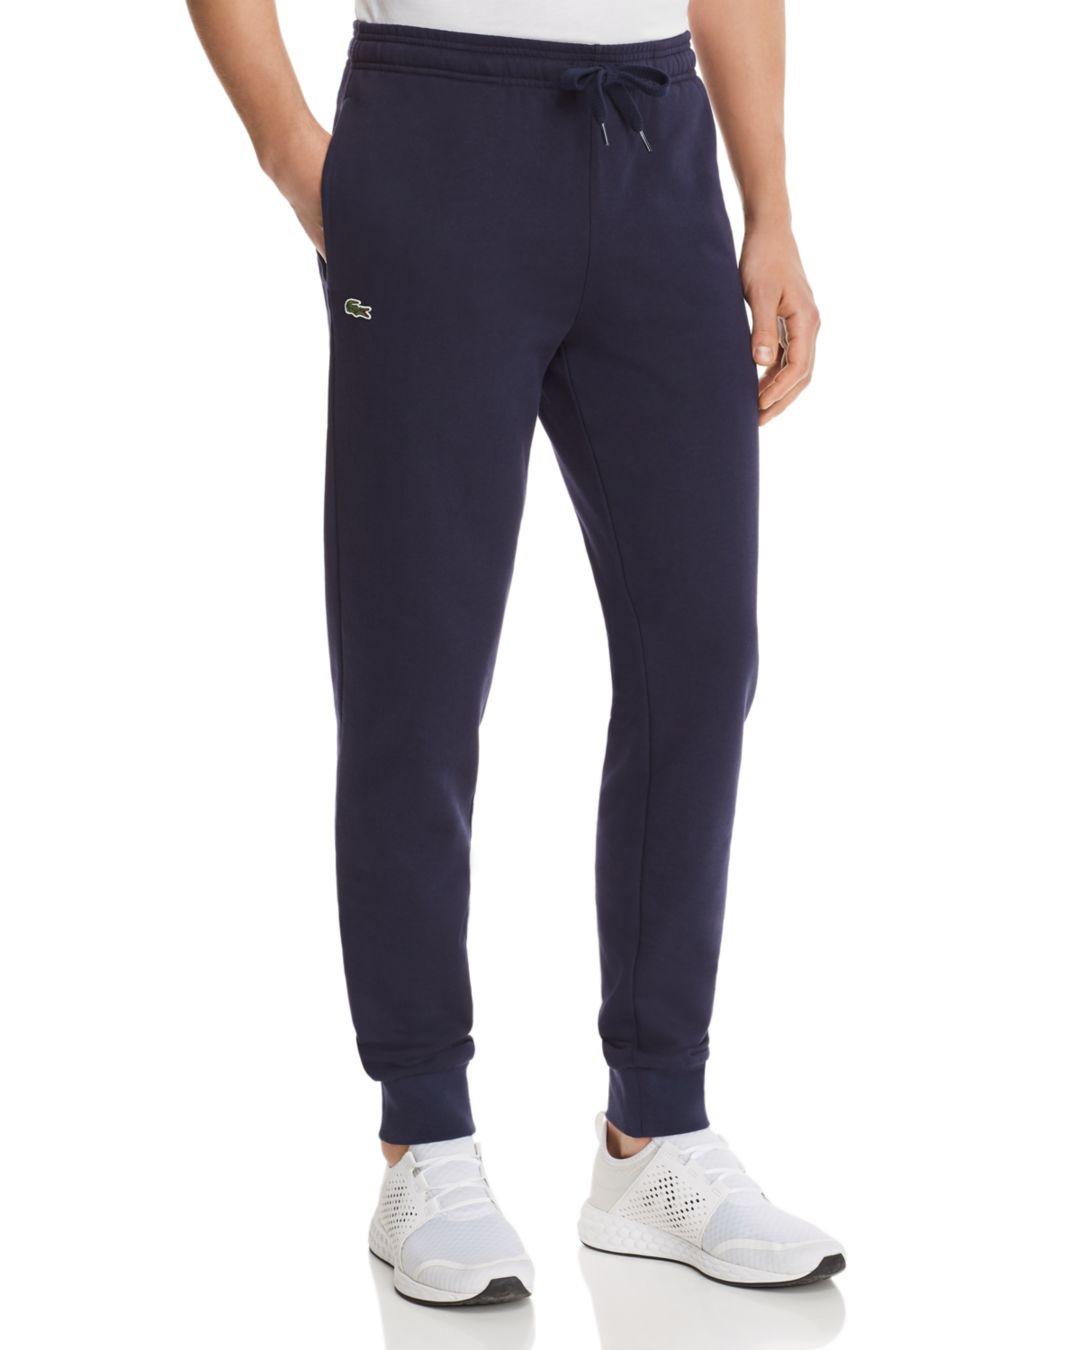 Lacoste French Terry Track Pants in Navy (Blue) for Men - Lyst